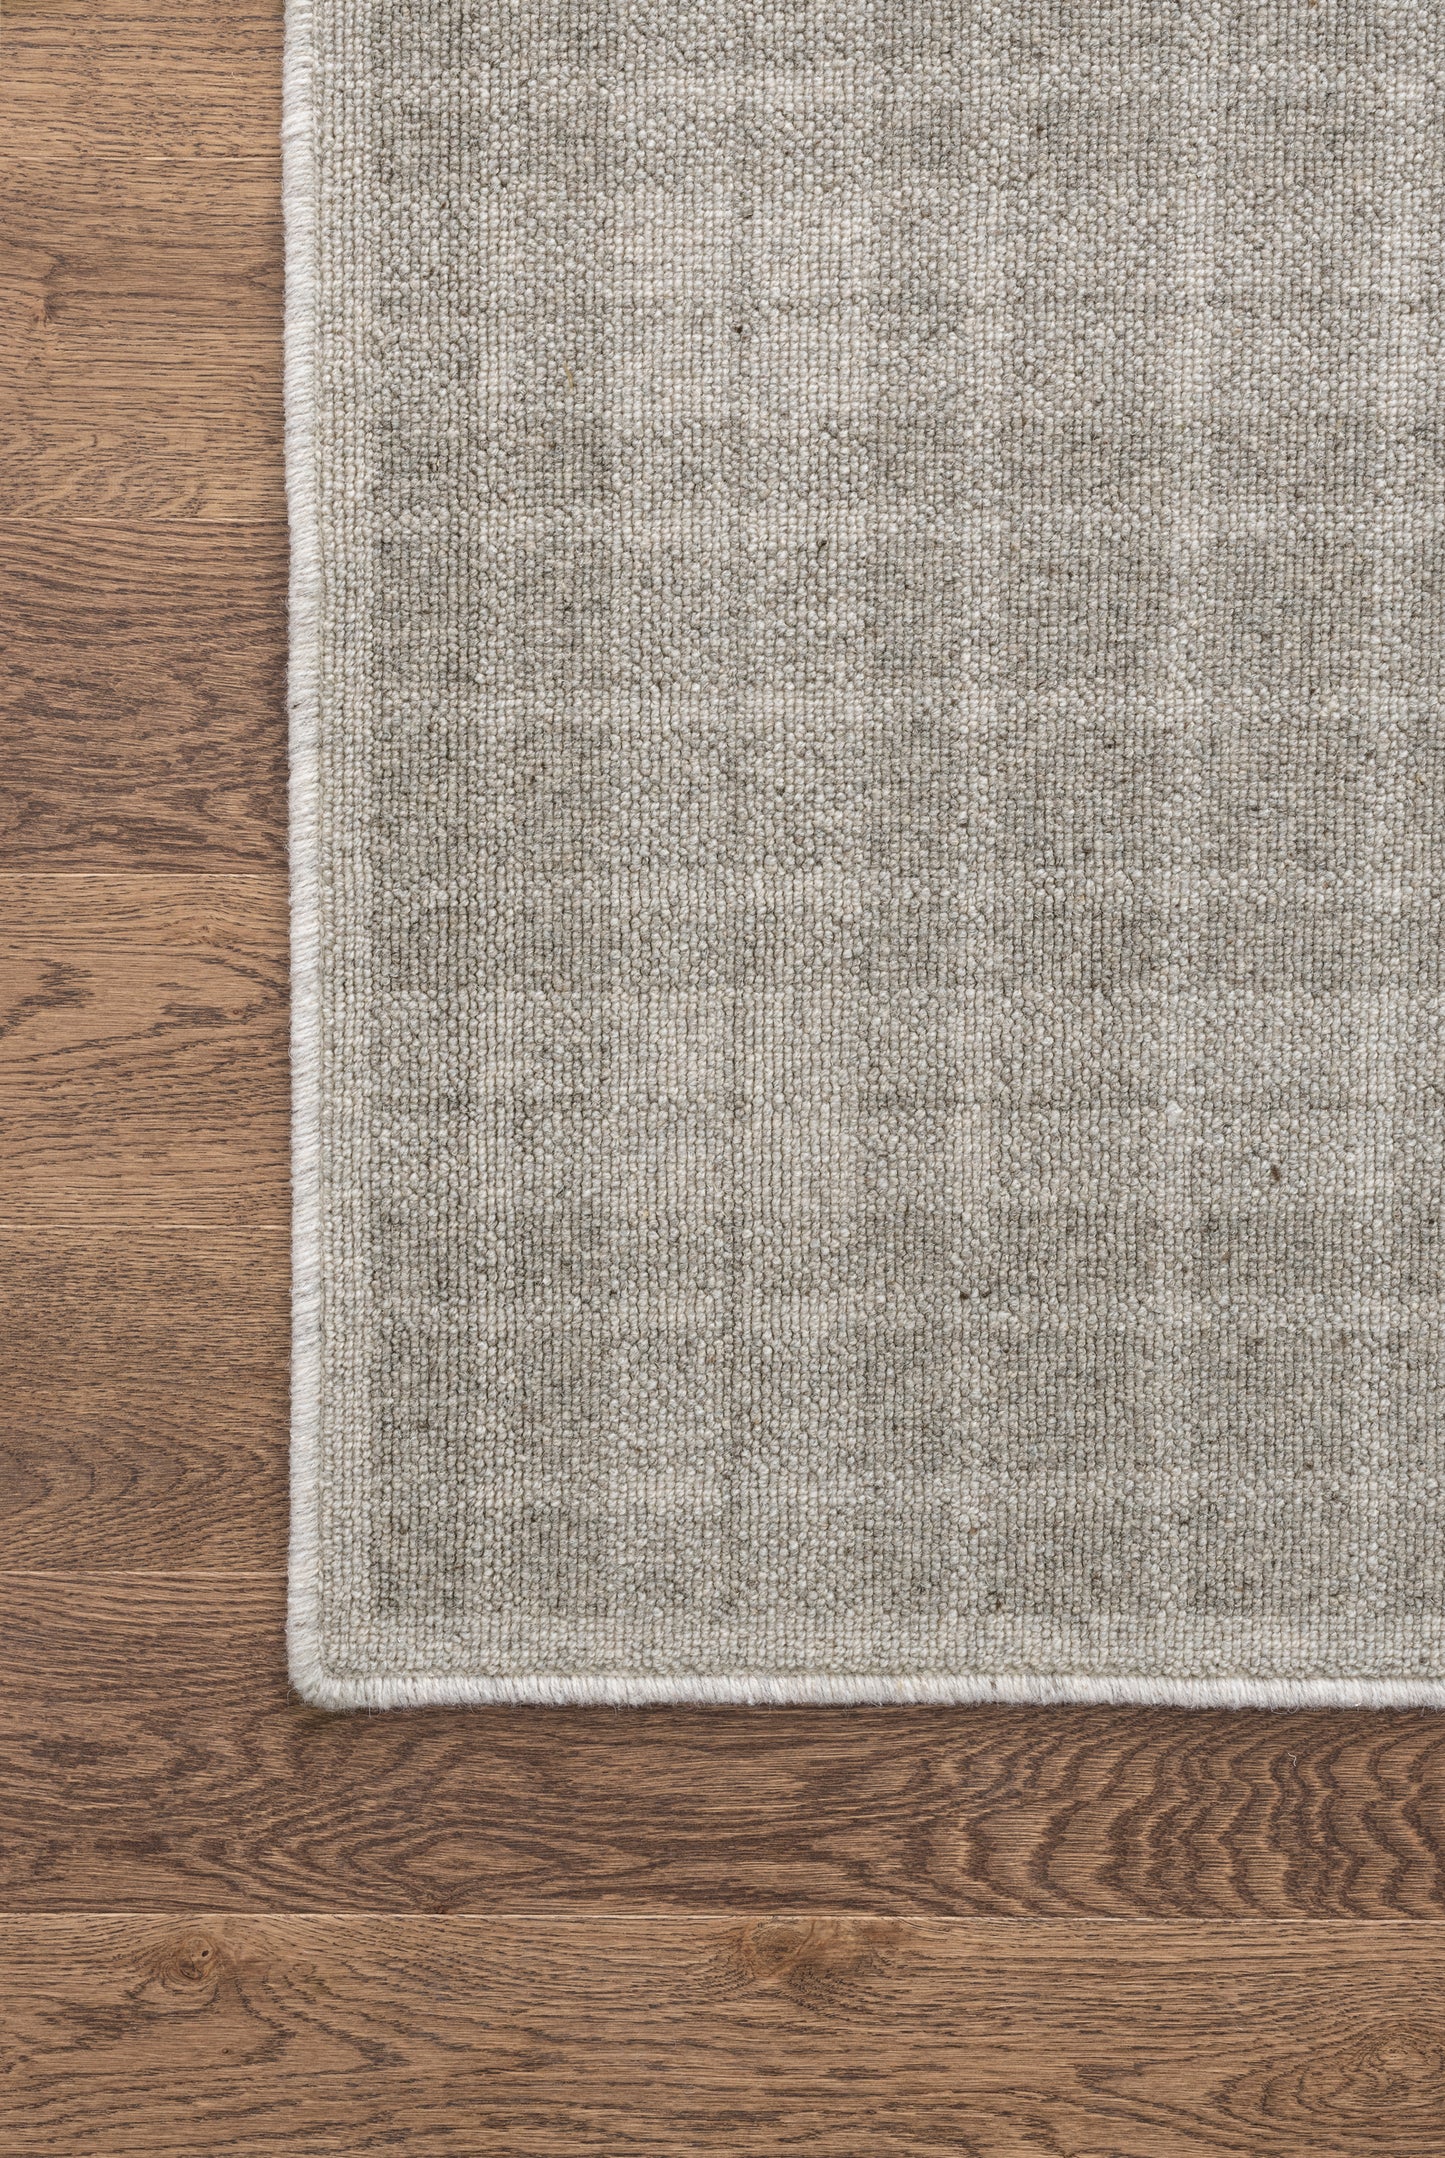 Agnella Rugs Noble PANO Light Grey - 100% Undyed British Wool - Free Delivery